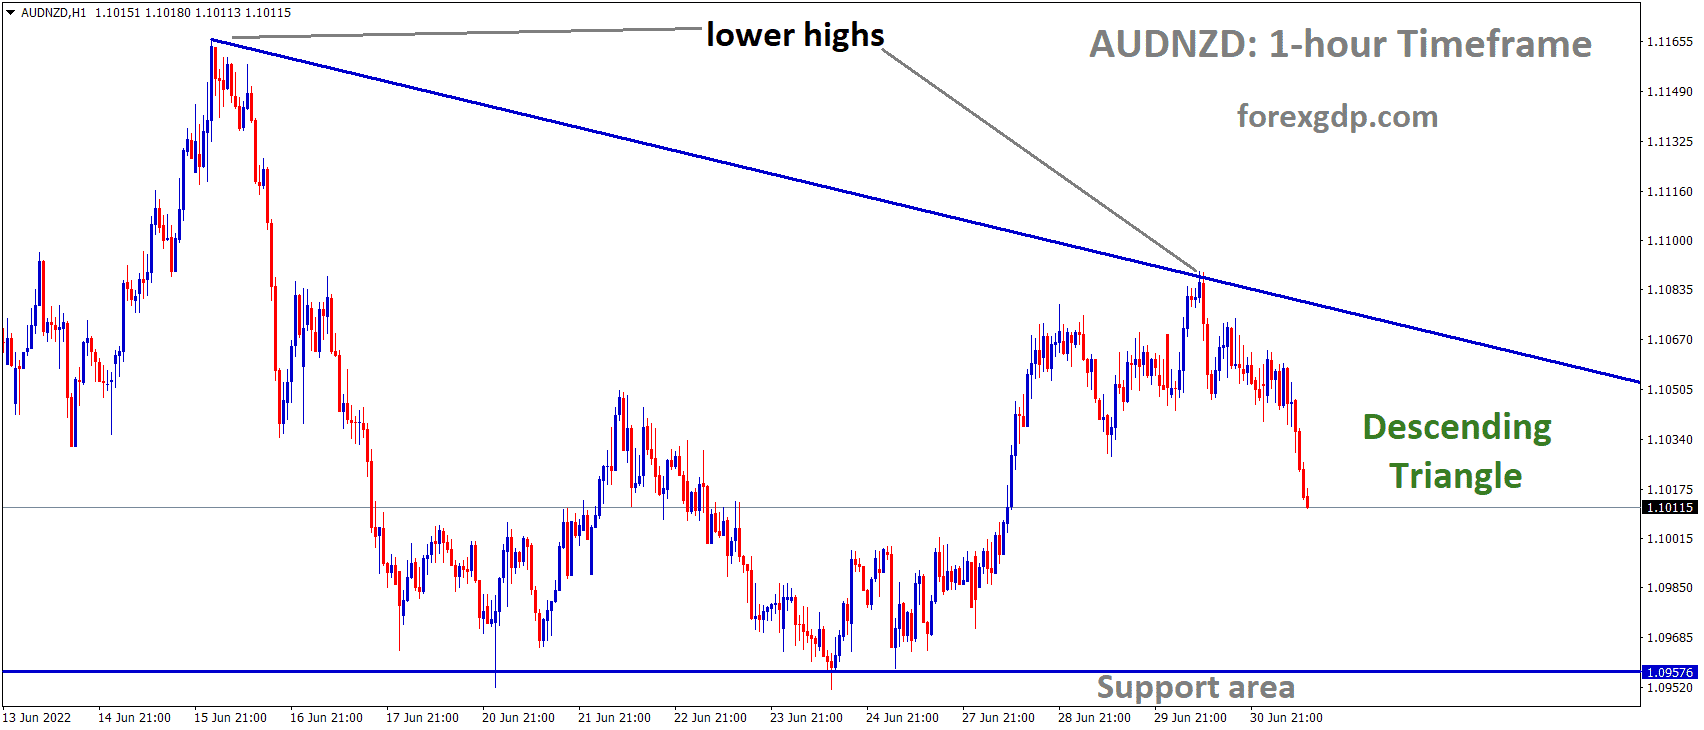 AUDNZD H1 Time Frame Analysis Market is moving in the Descending triangle pattern and the Market has fallen from the Lower high area of the Pattern.